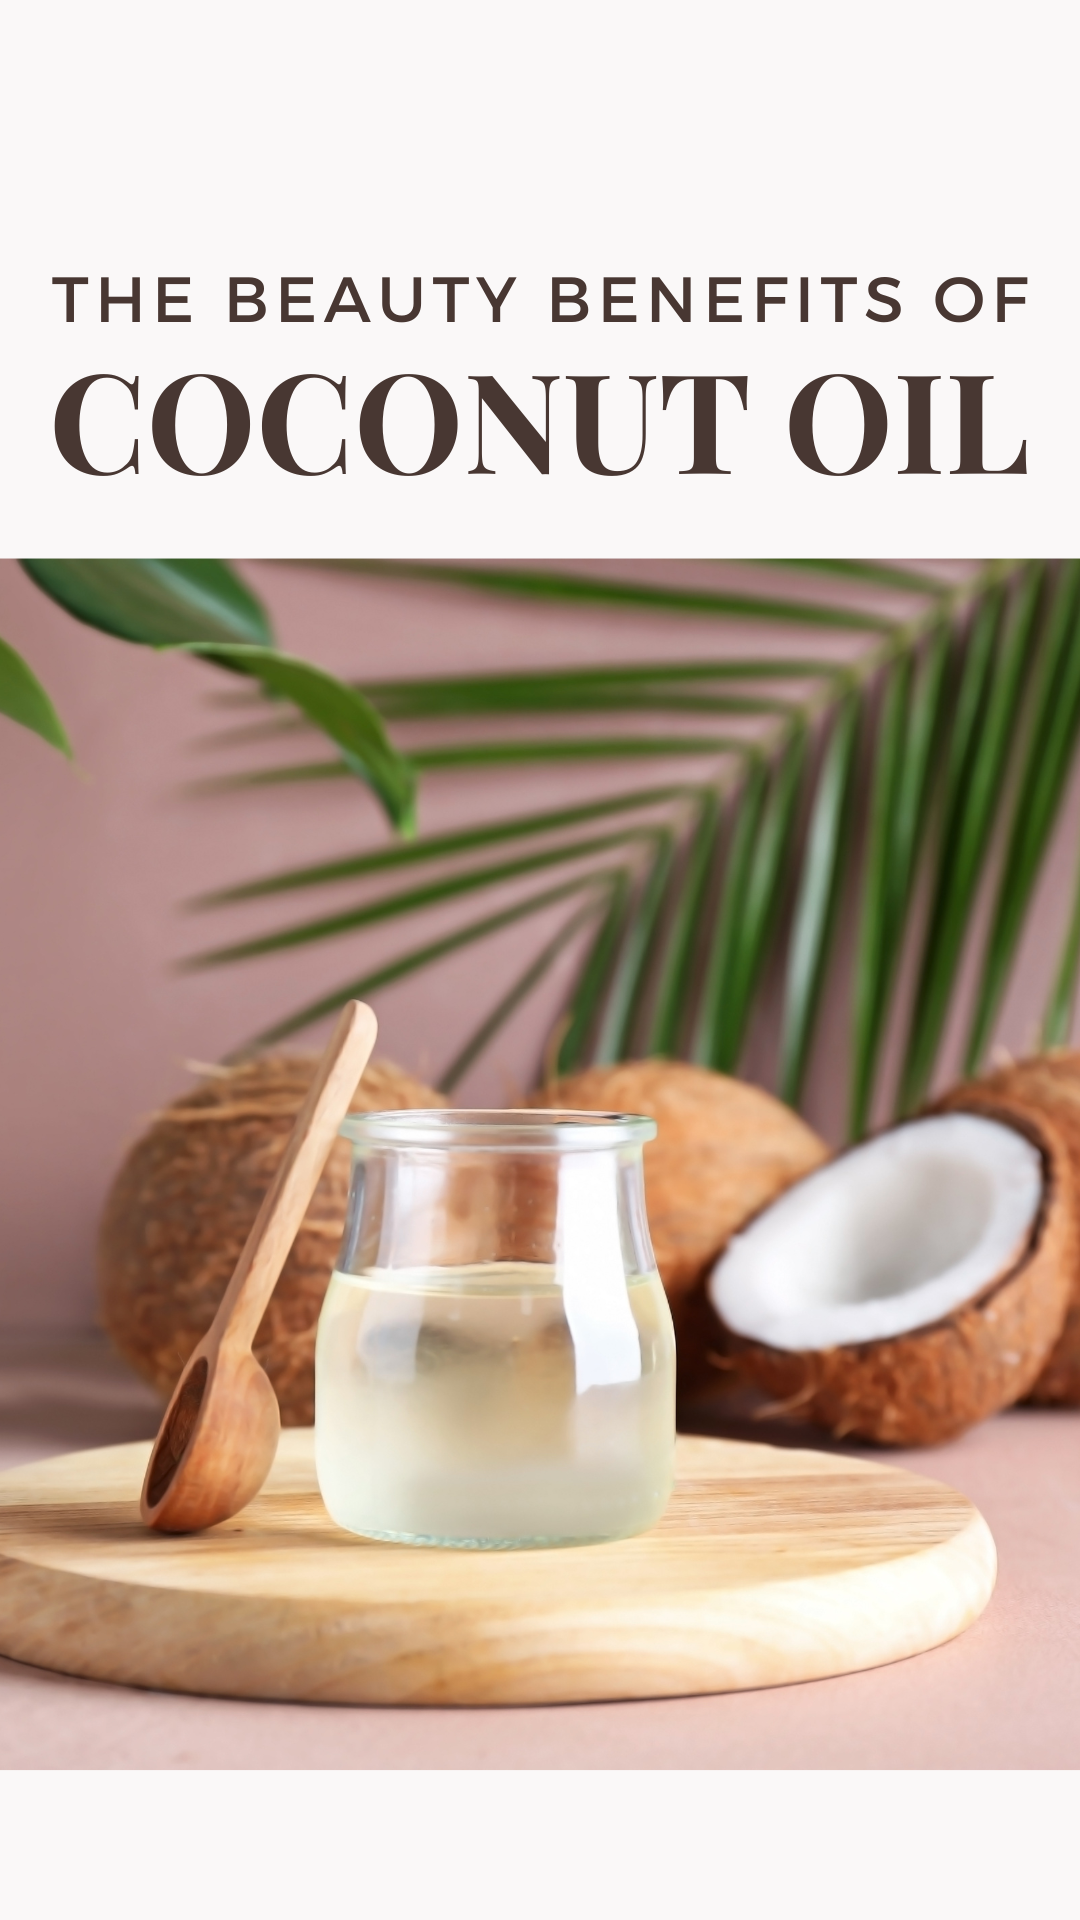 The Beauty Benefits of Coconut Oil